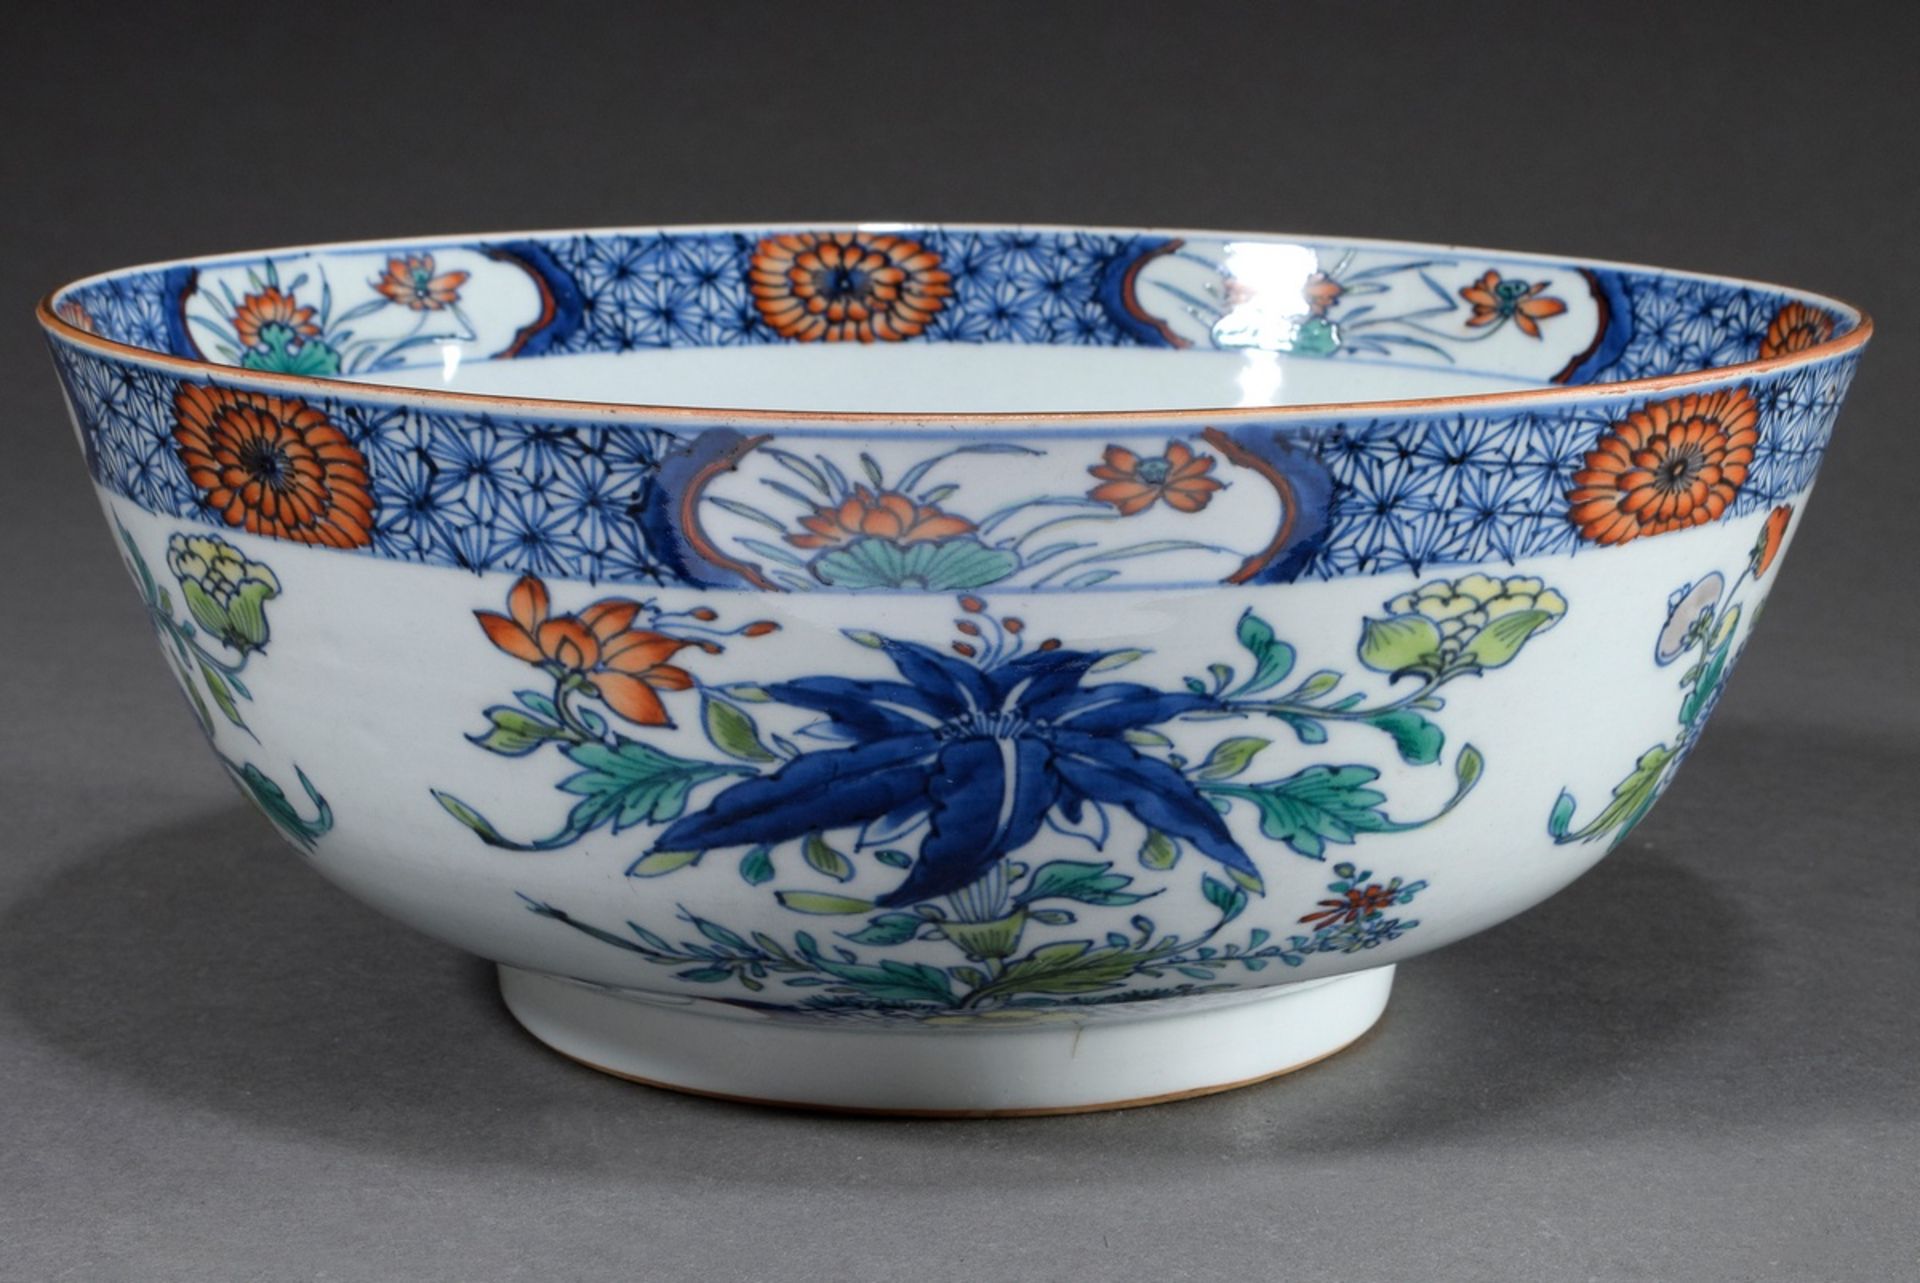 Large doucai bowl with floral blue painting and coloured decoration, China probably 2nd half 18th c